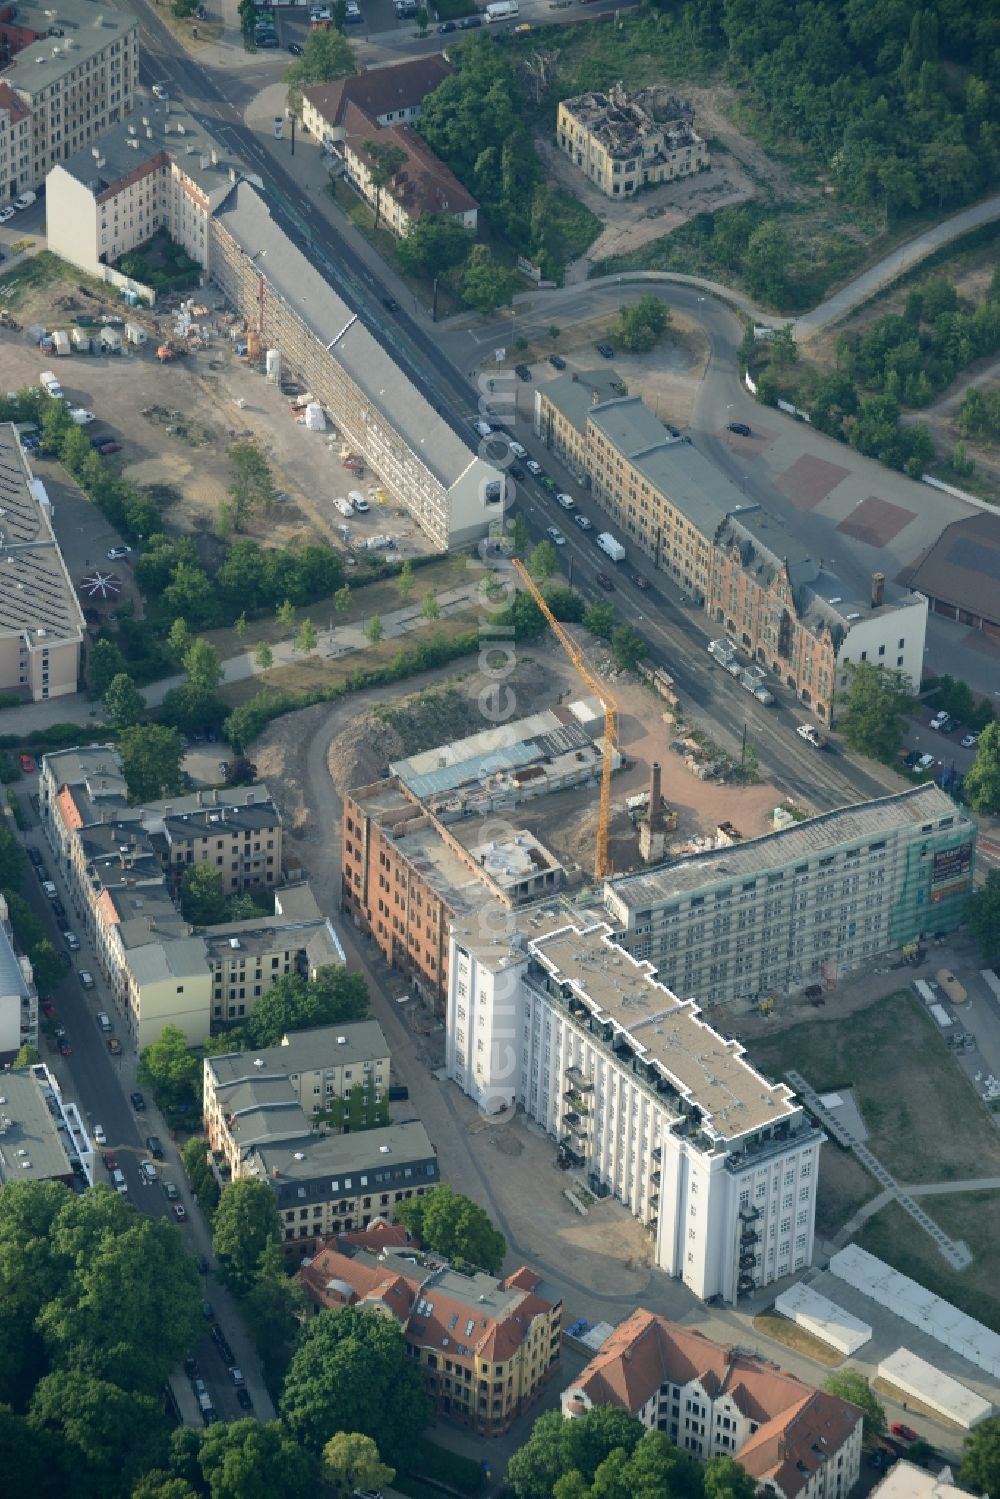 Aerial image Magdeburg - View of the construction project MESSMA - Lofts in the district of Buckau in Magdeburg in the state of Saxony-Anhalt